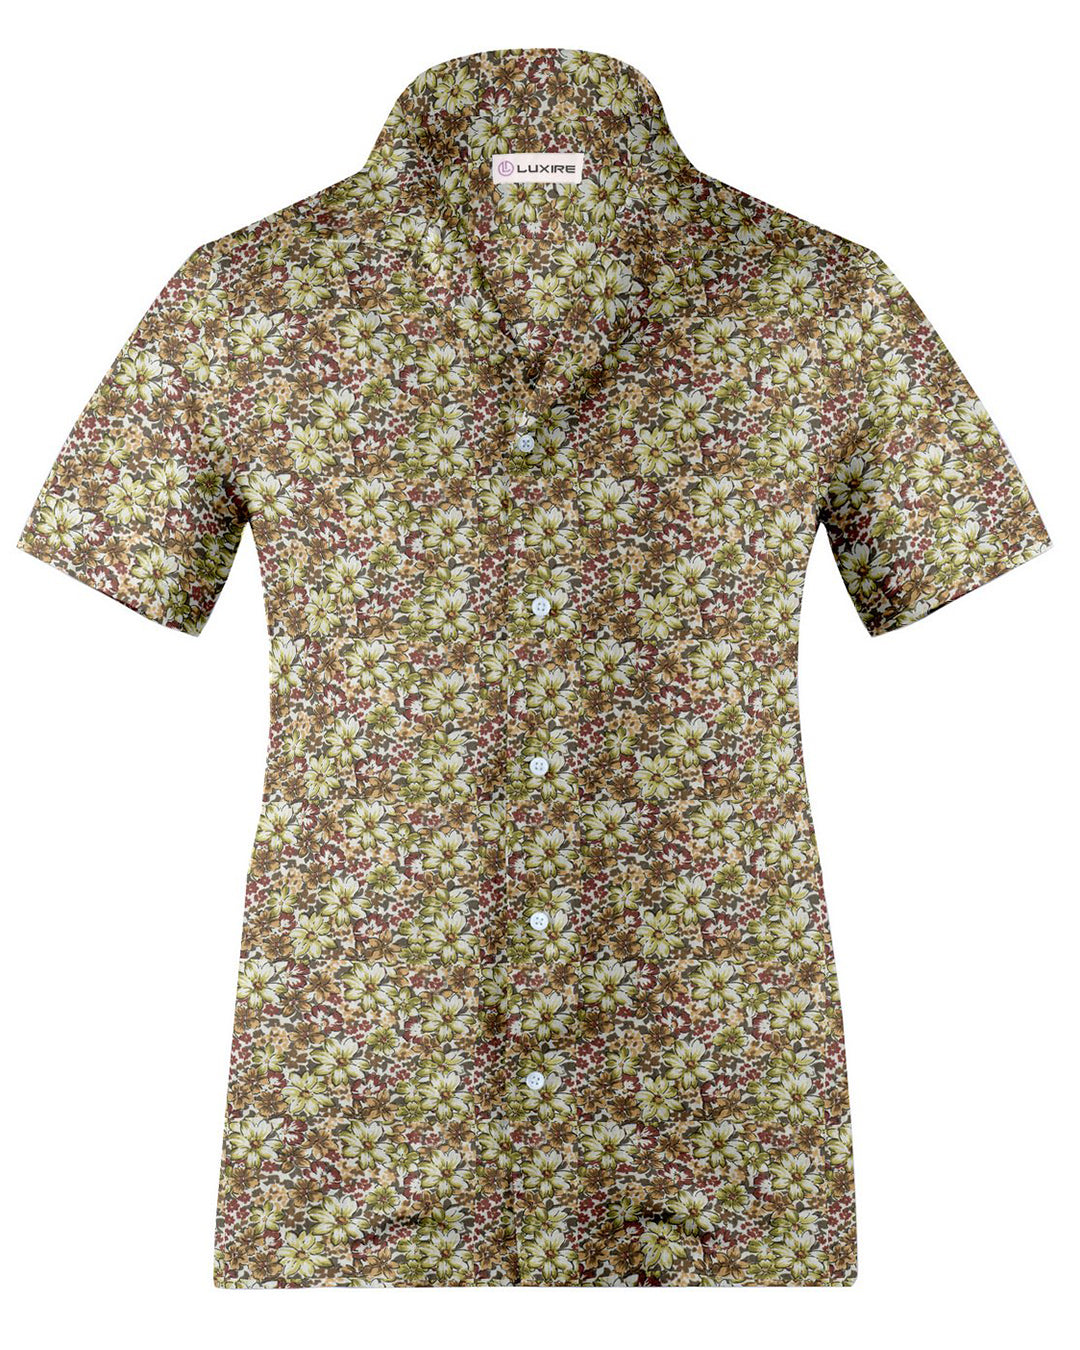 Camp collar PRESET STYLE in Olive Green Maroon prints on White